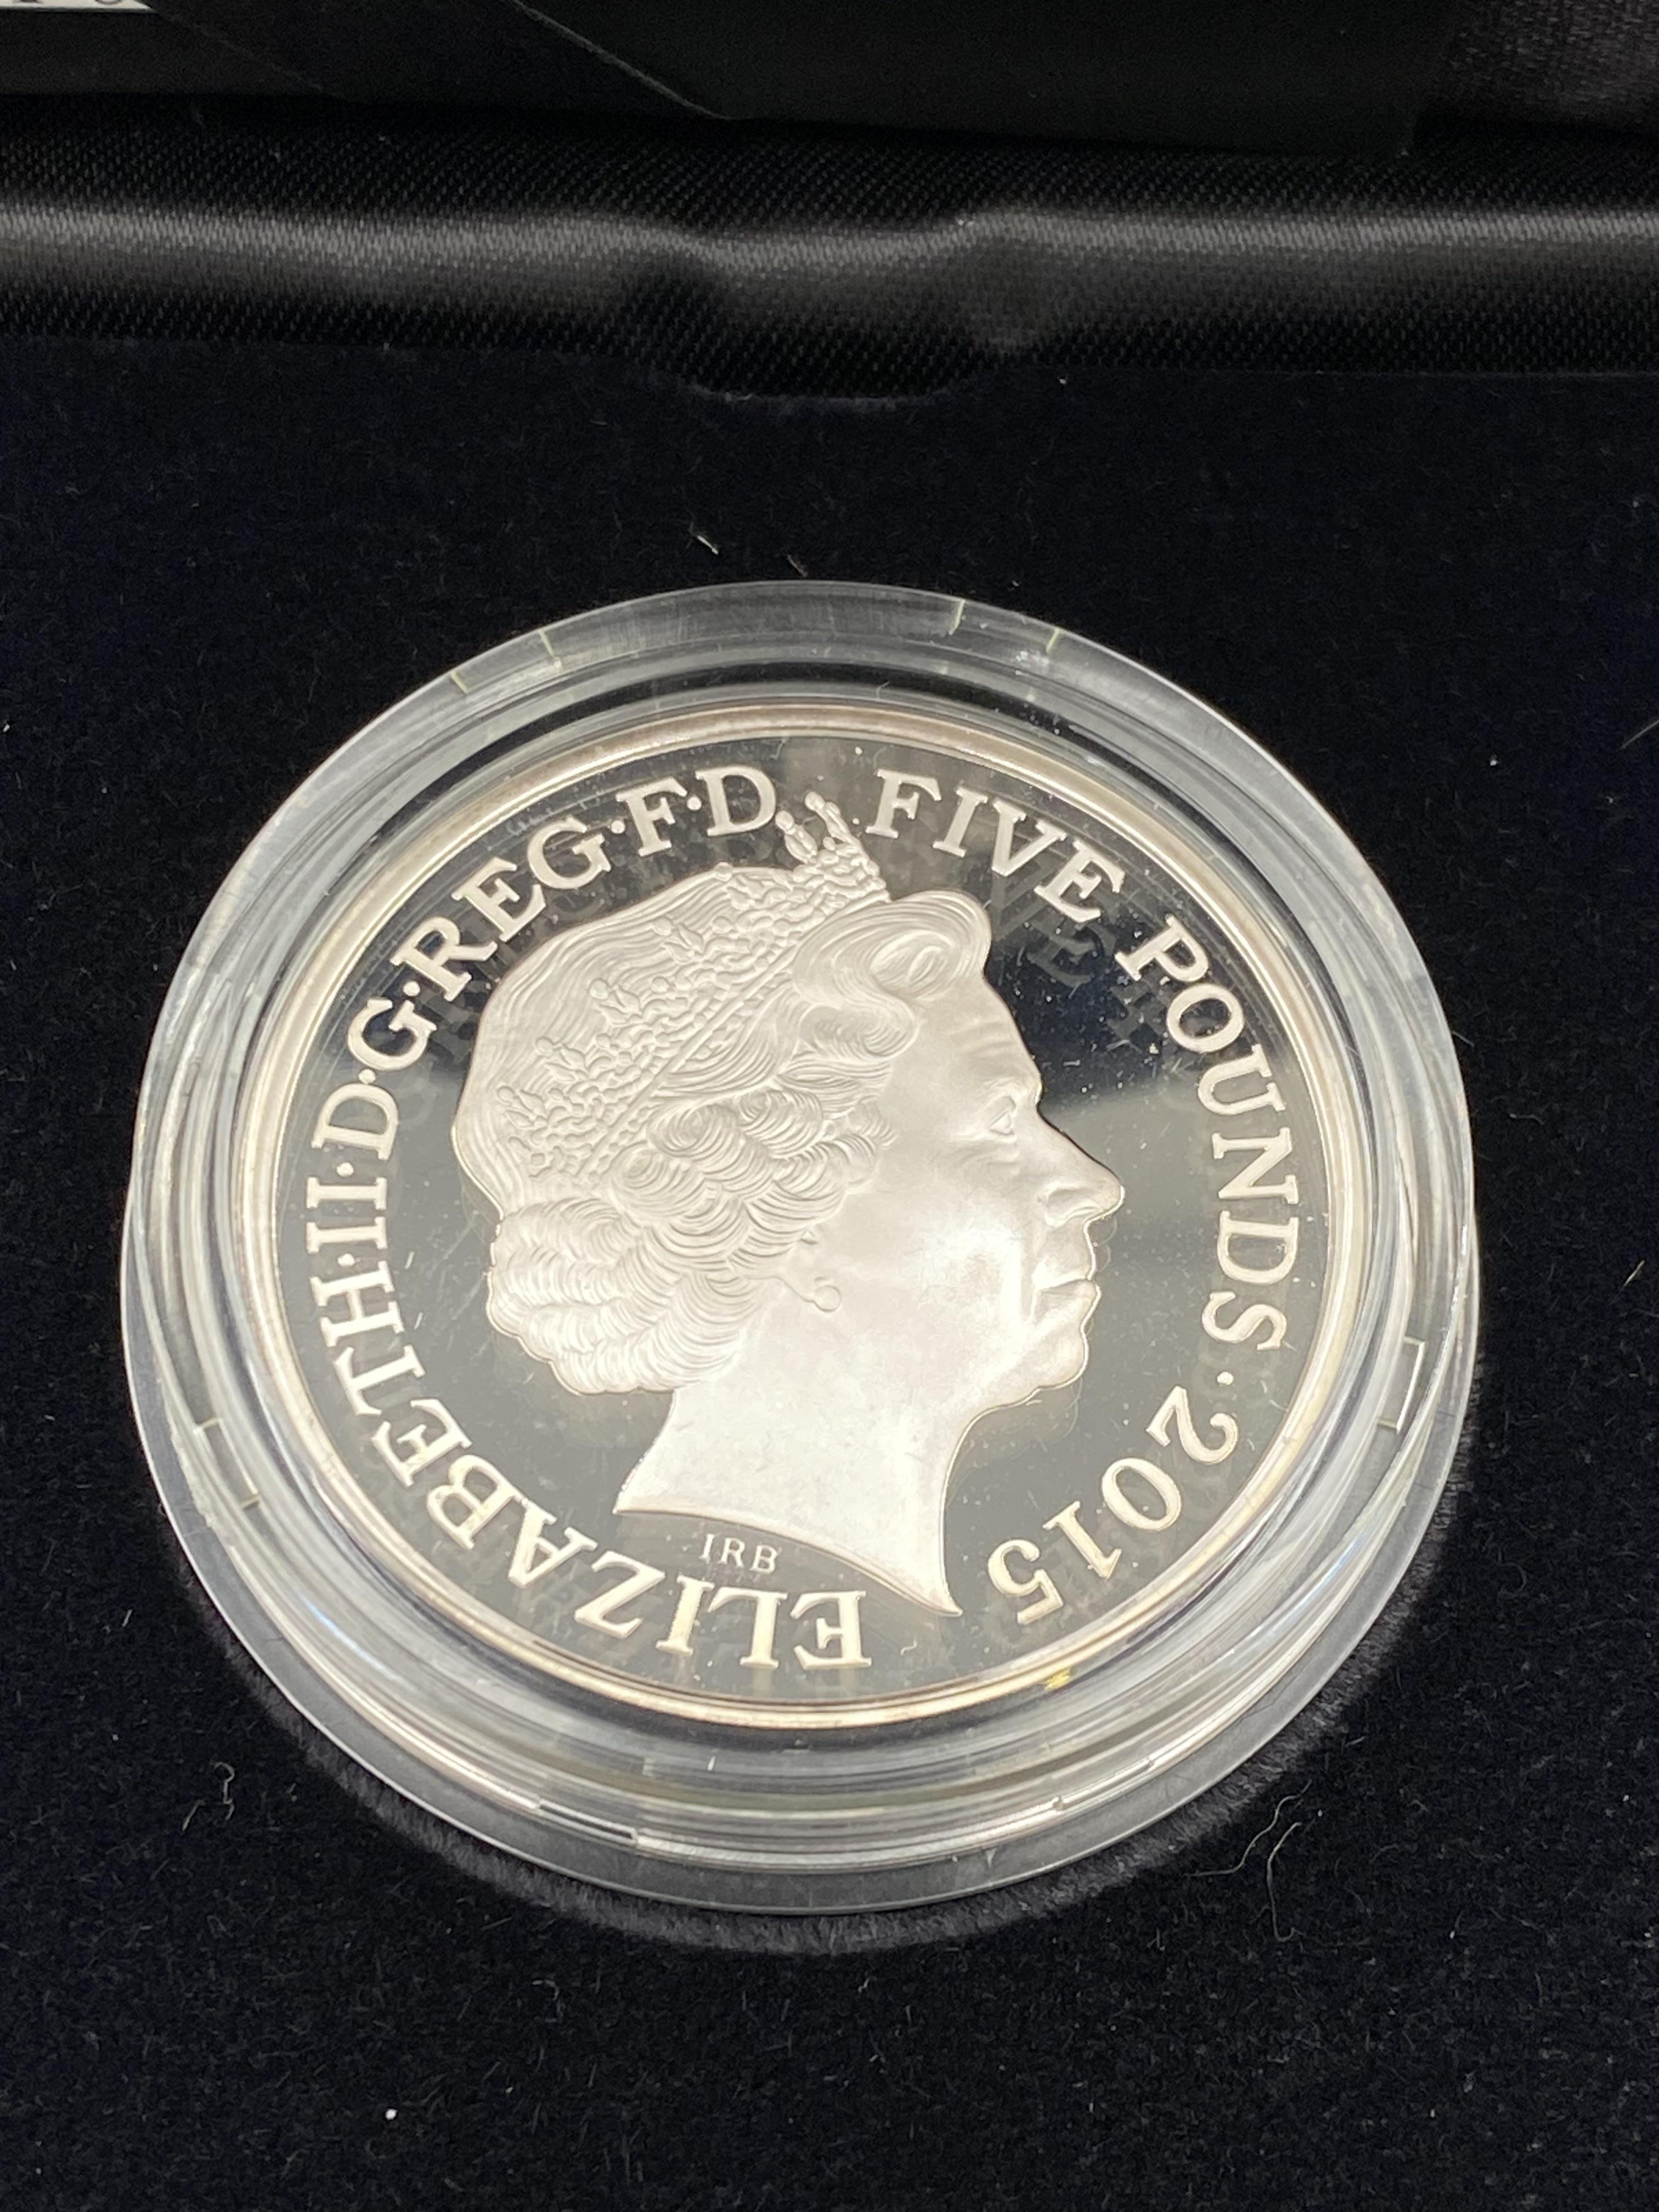 Royal Mint 50th Anniversary of the Death of Winston Churchill 2015 £5 silver proof coin - Image 3 of 3